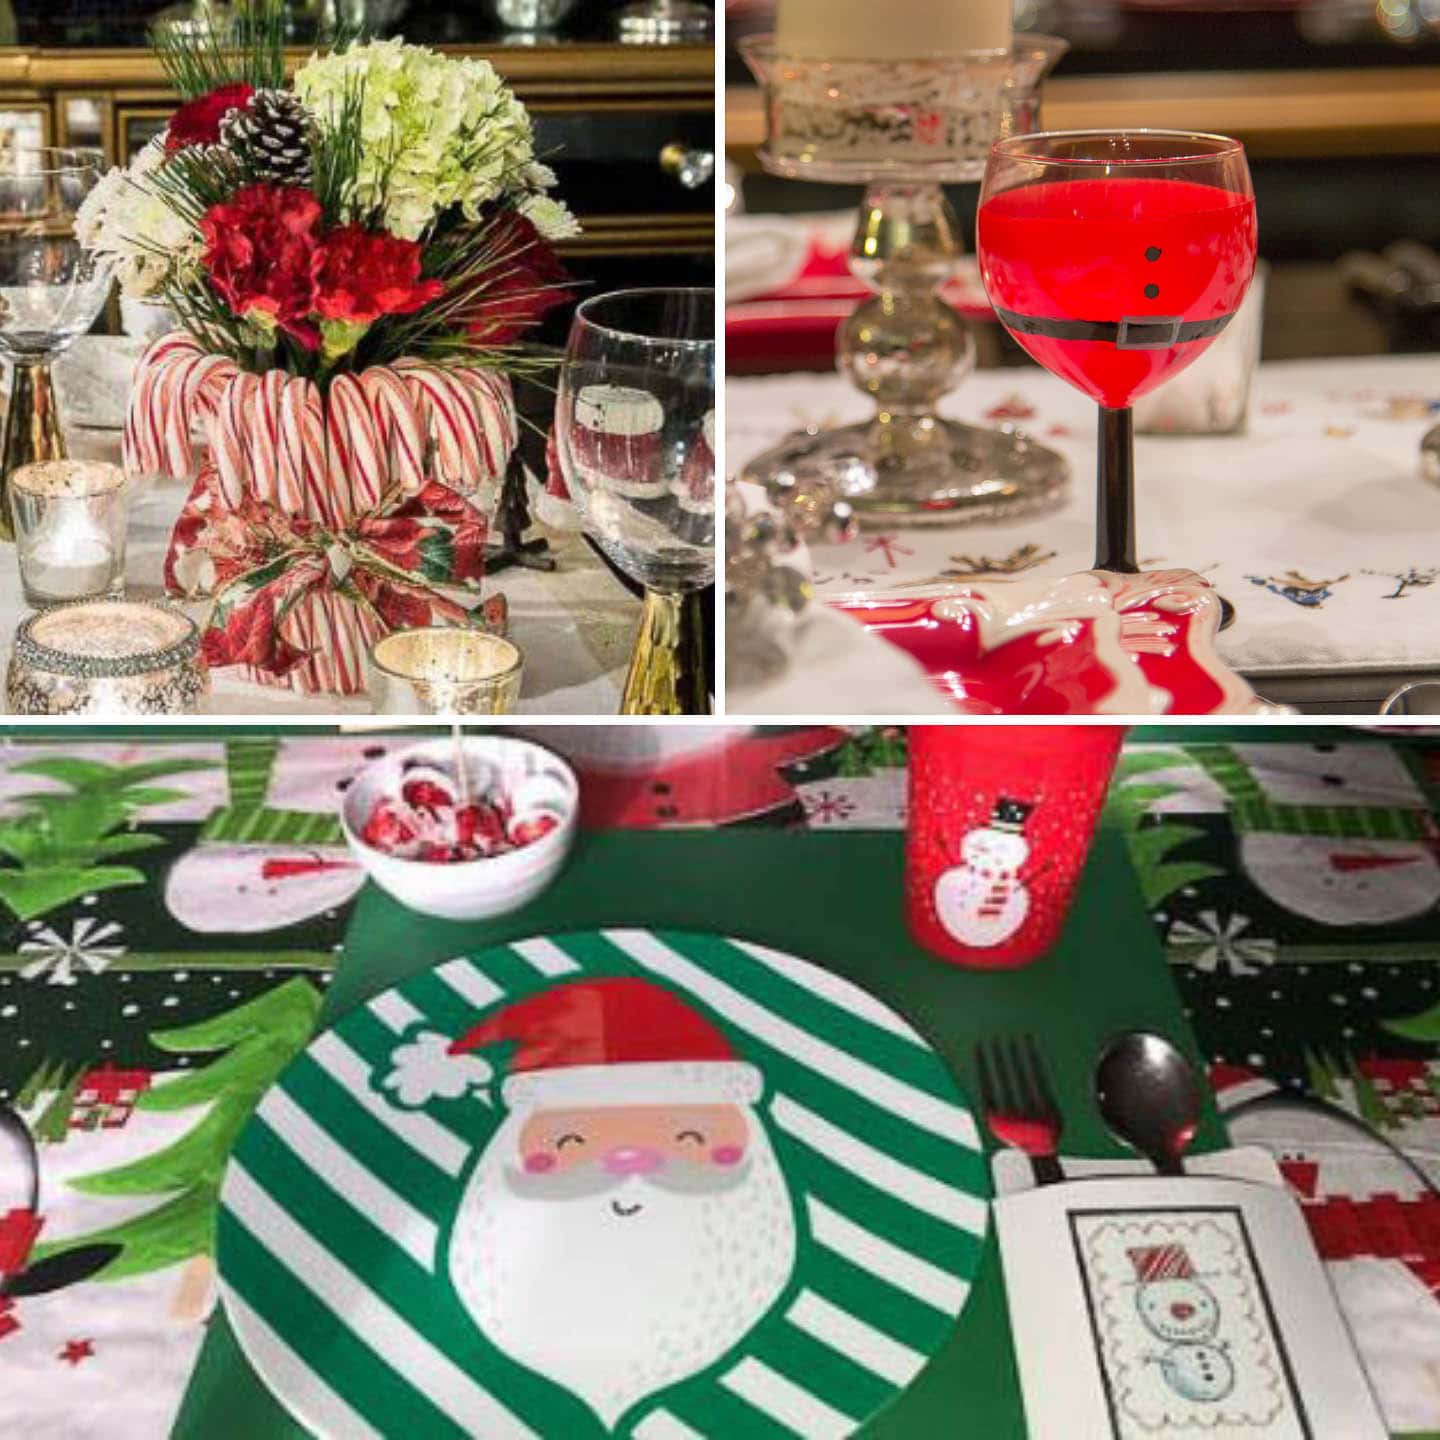 DIY candy cane vase, painted Santa wine glasses and a Santa-themed tablescape